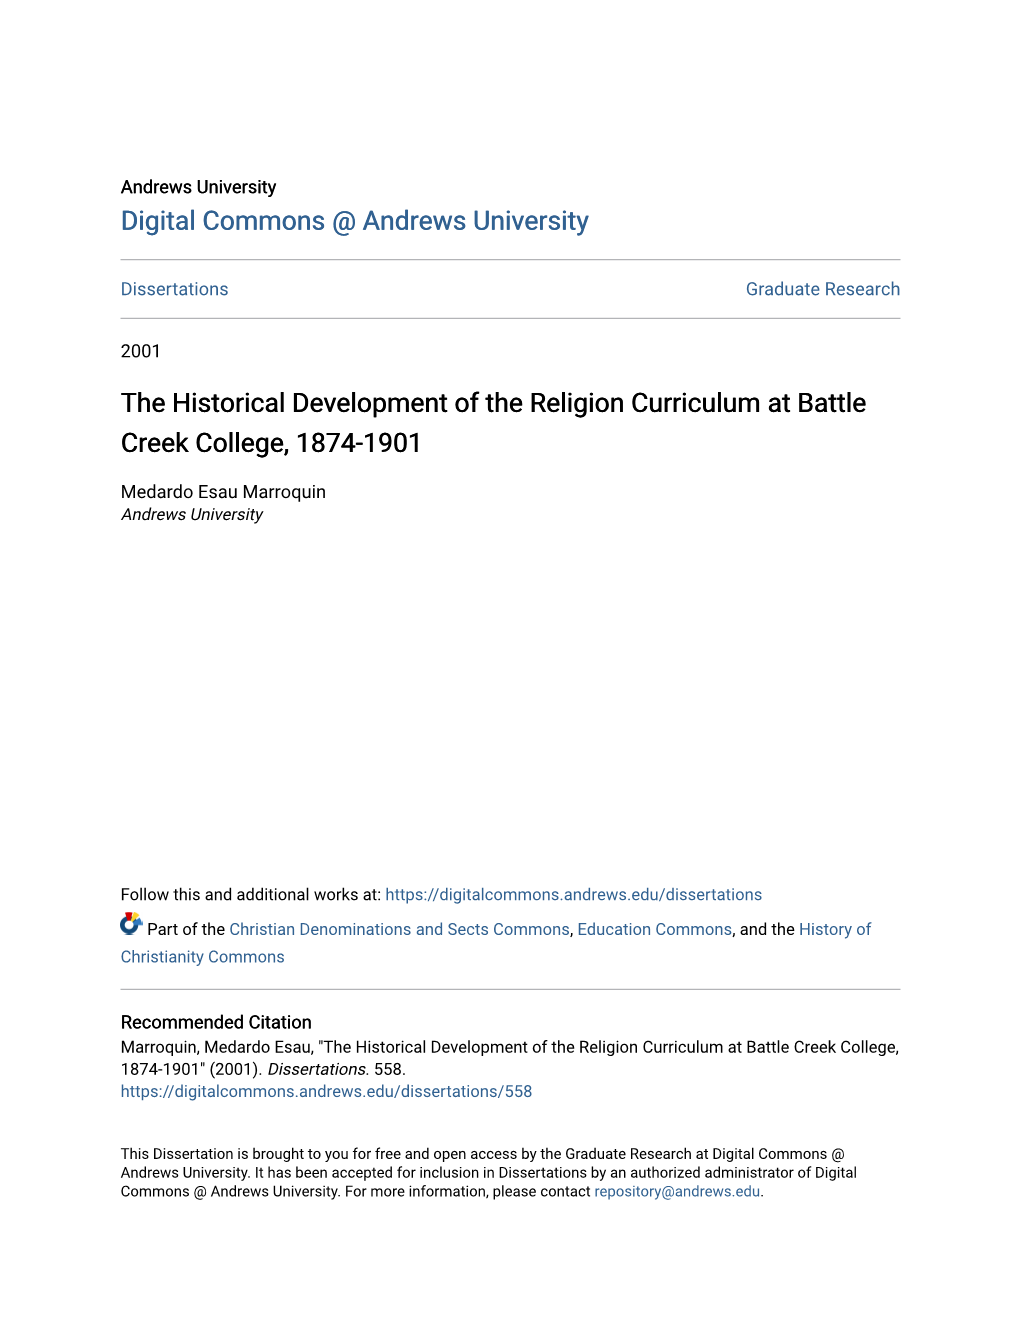 The Historical Development of the Religion Curriculum at Battle Creek College, 1874-1901